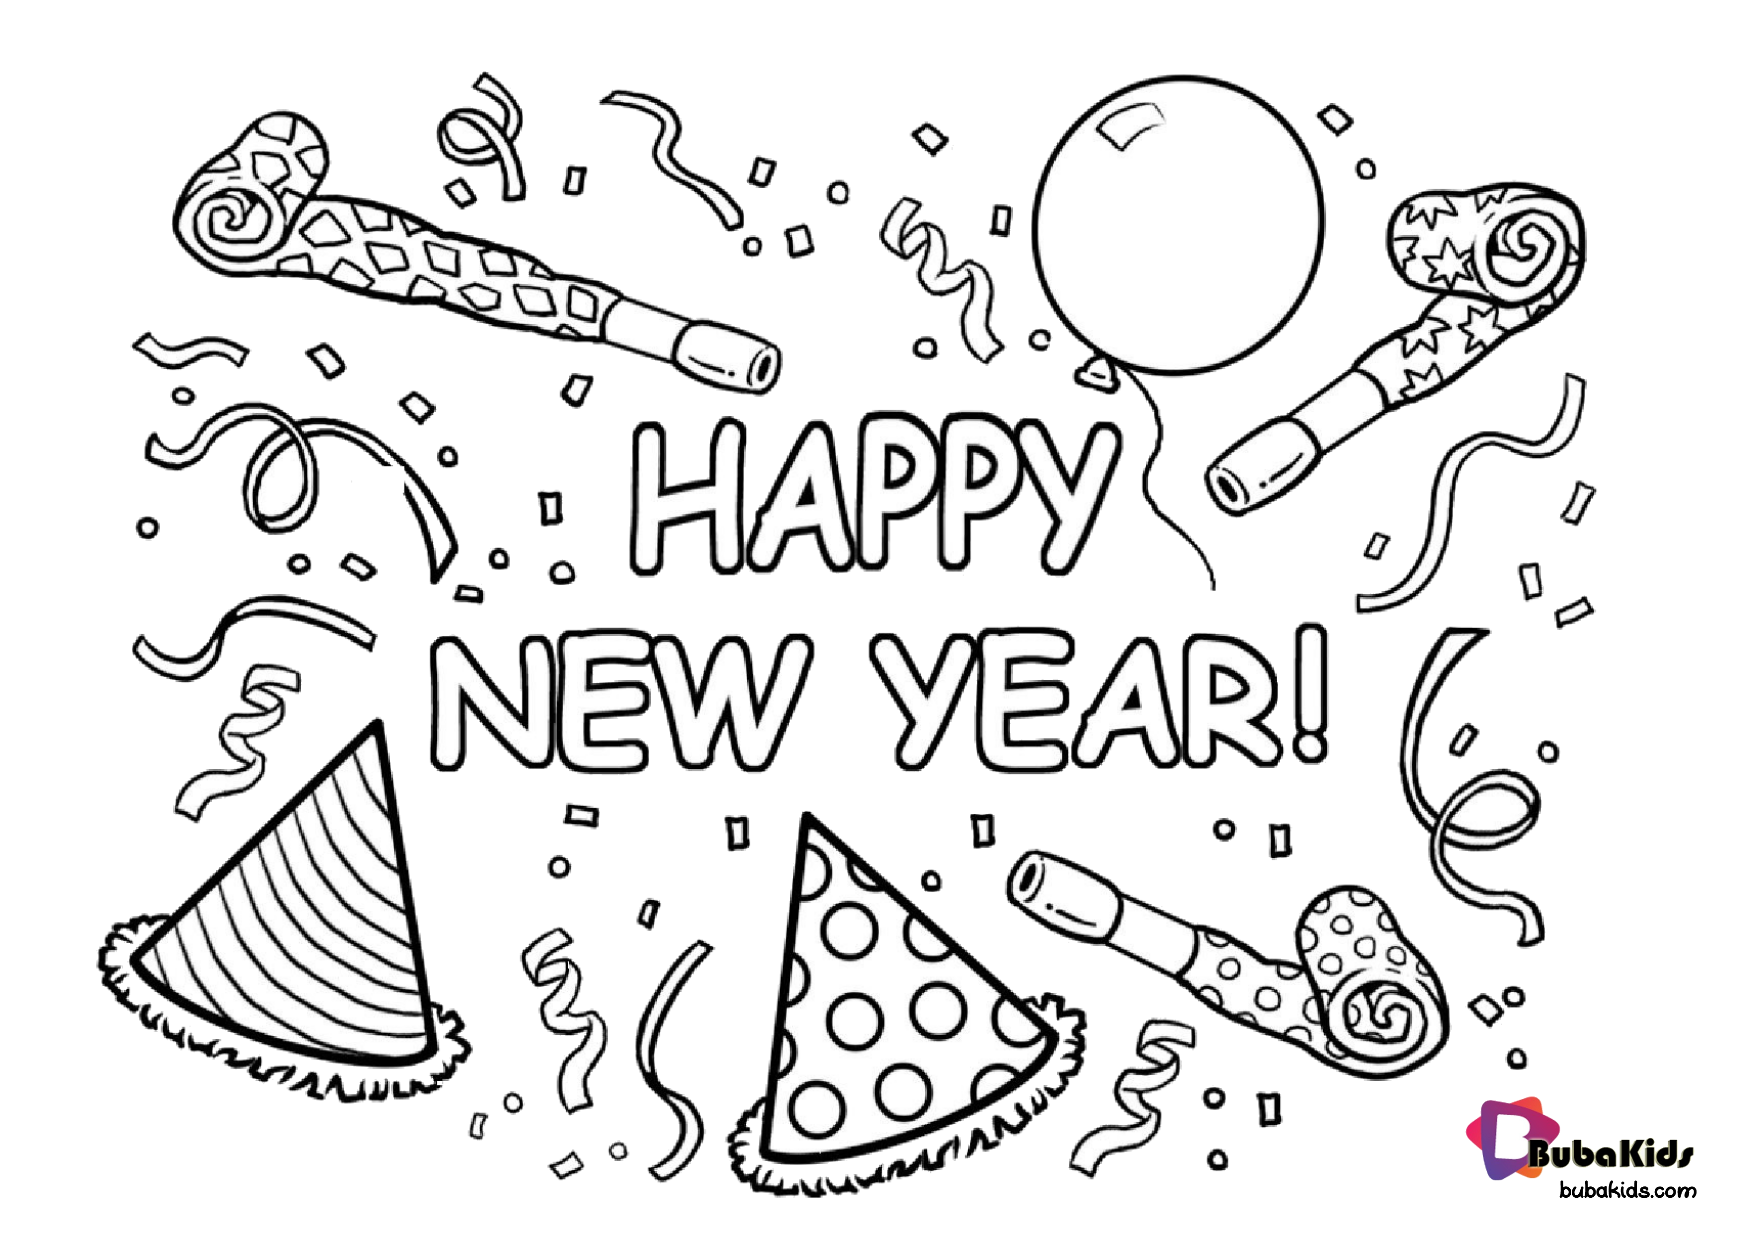 Free download happy new year printable coloring page. Wallpaper